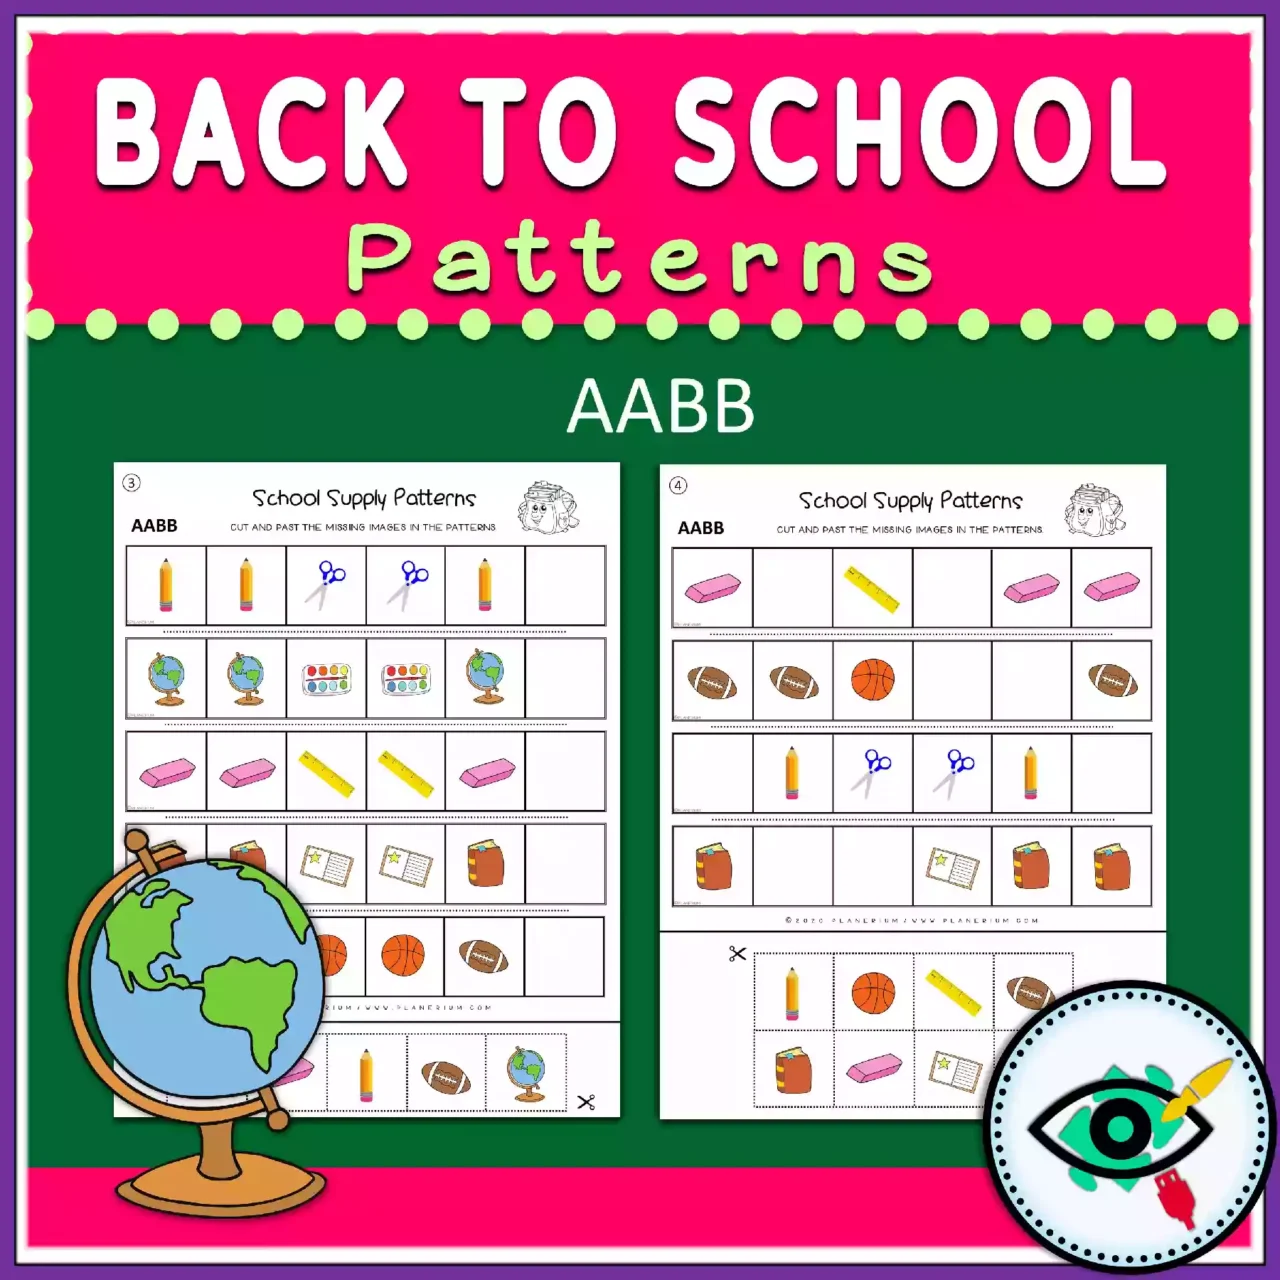 Back to School Patterns - Featured 3